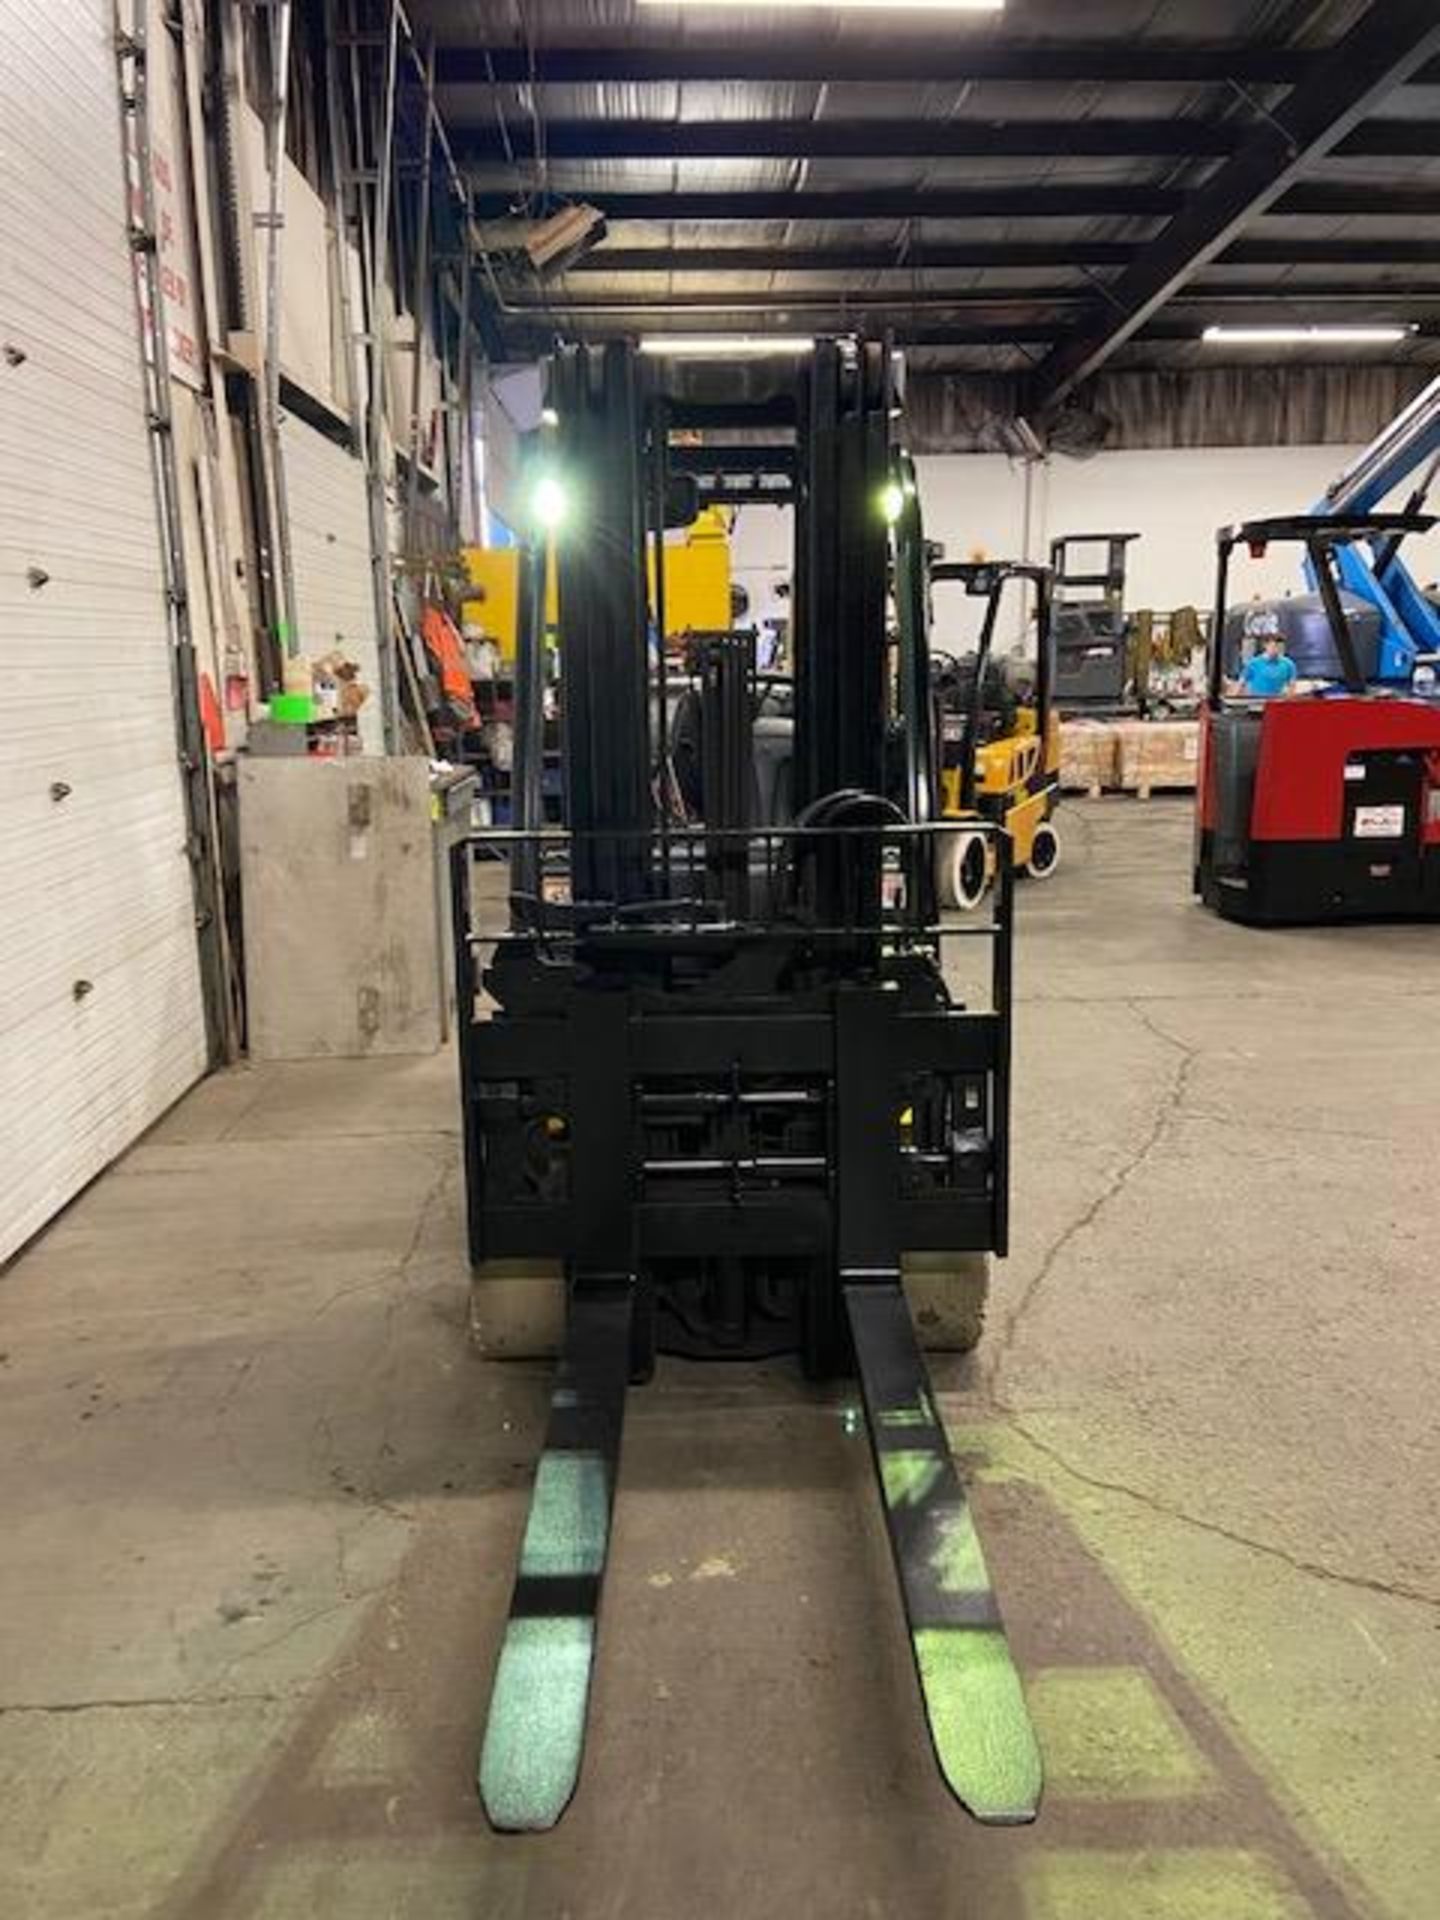 FREE CUSTOMS - 2017 Yale 7000lbs Capacity GLC70 Forklift LPG (propane) with 3-STAGE MAST with - Image 2 of 3